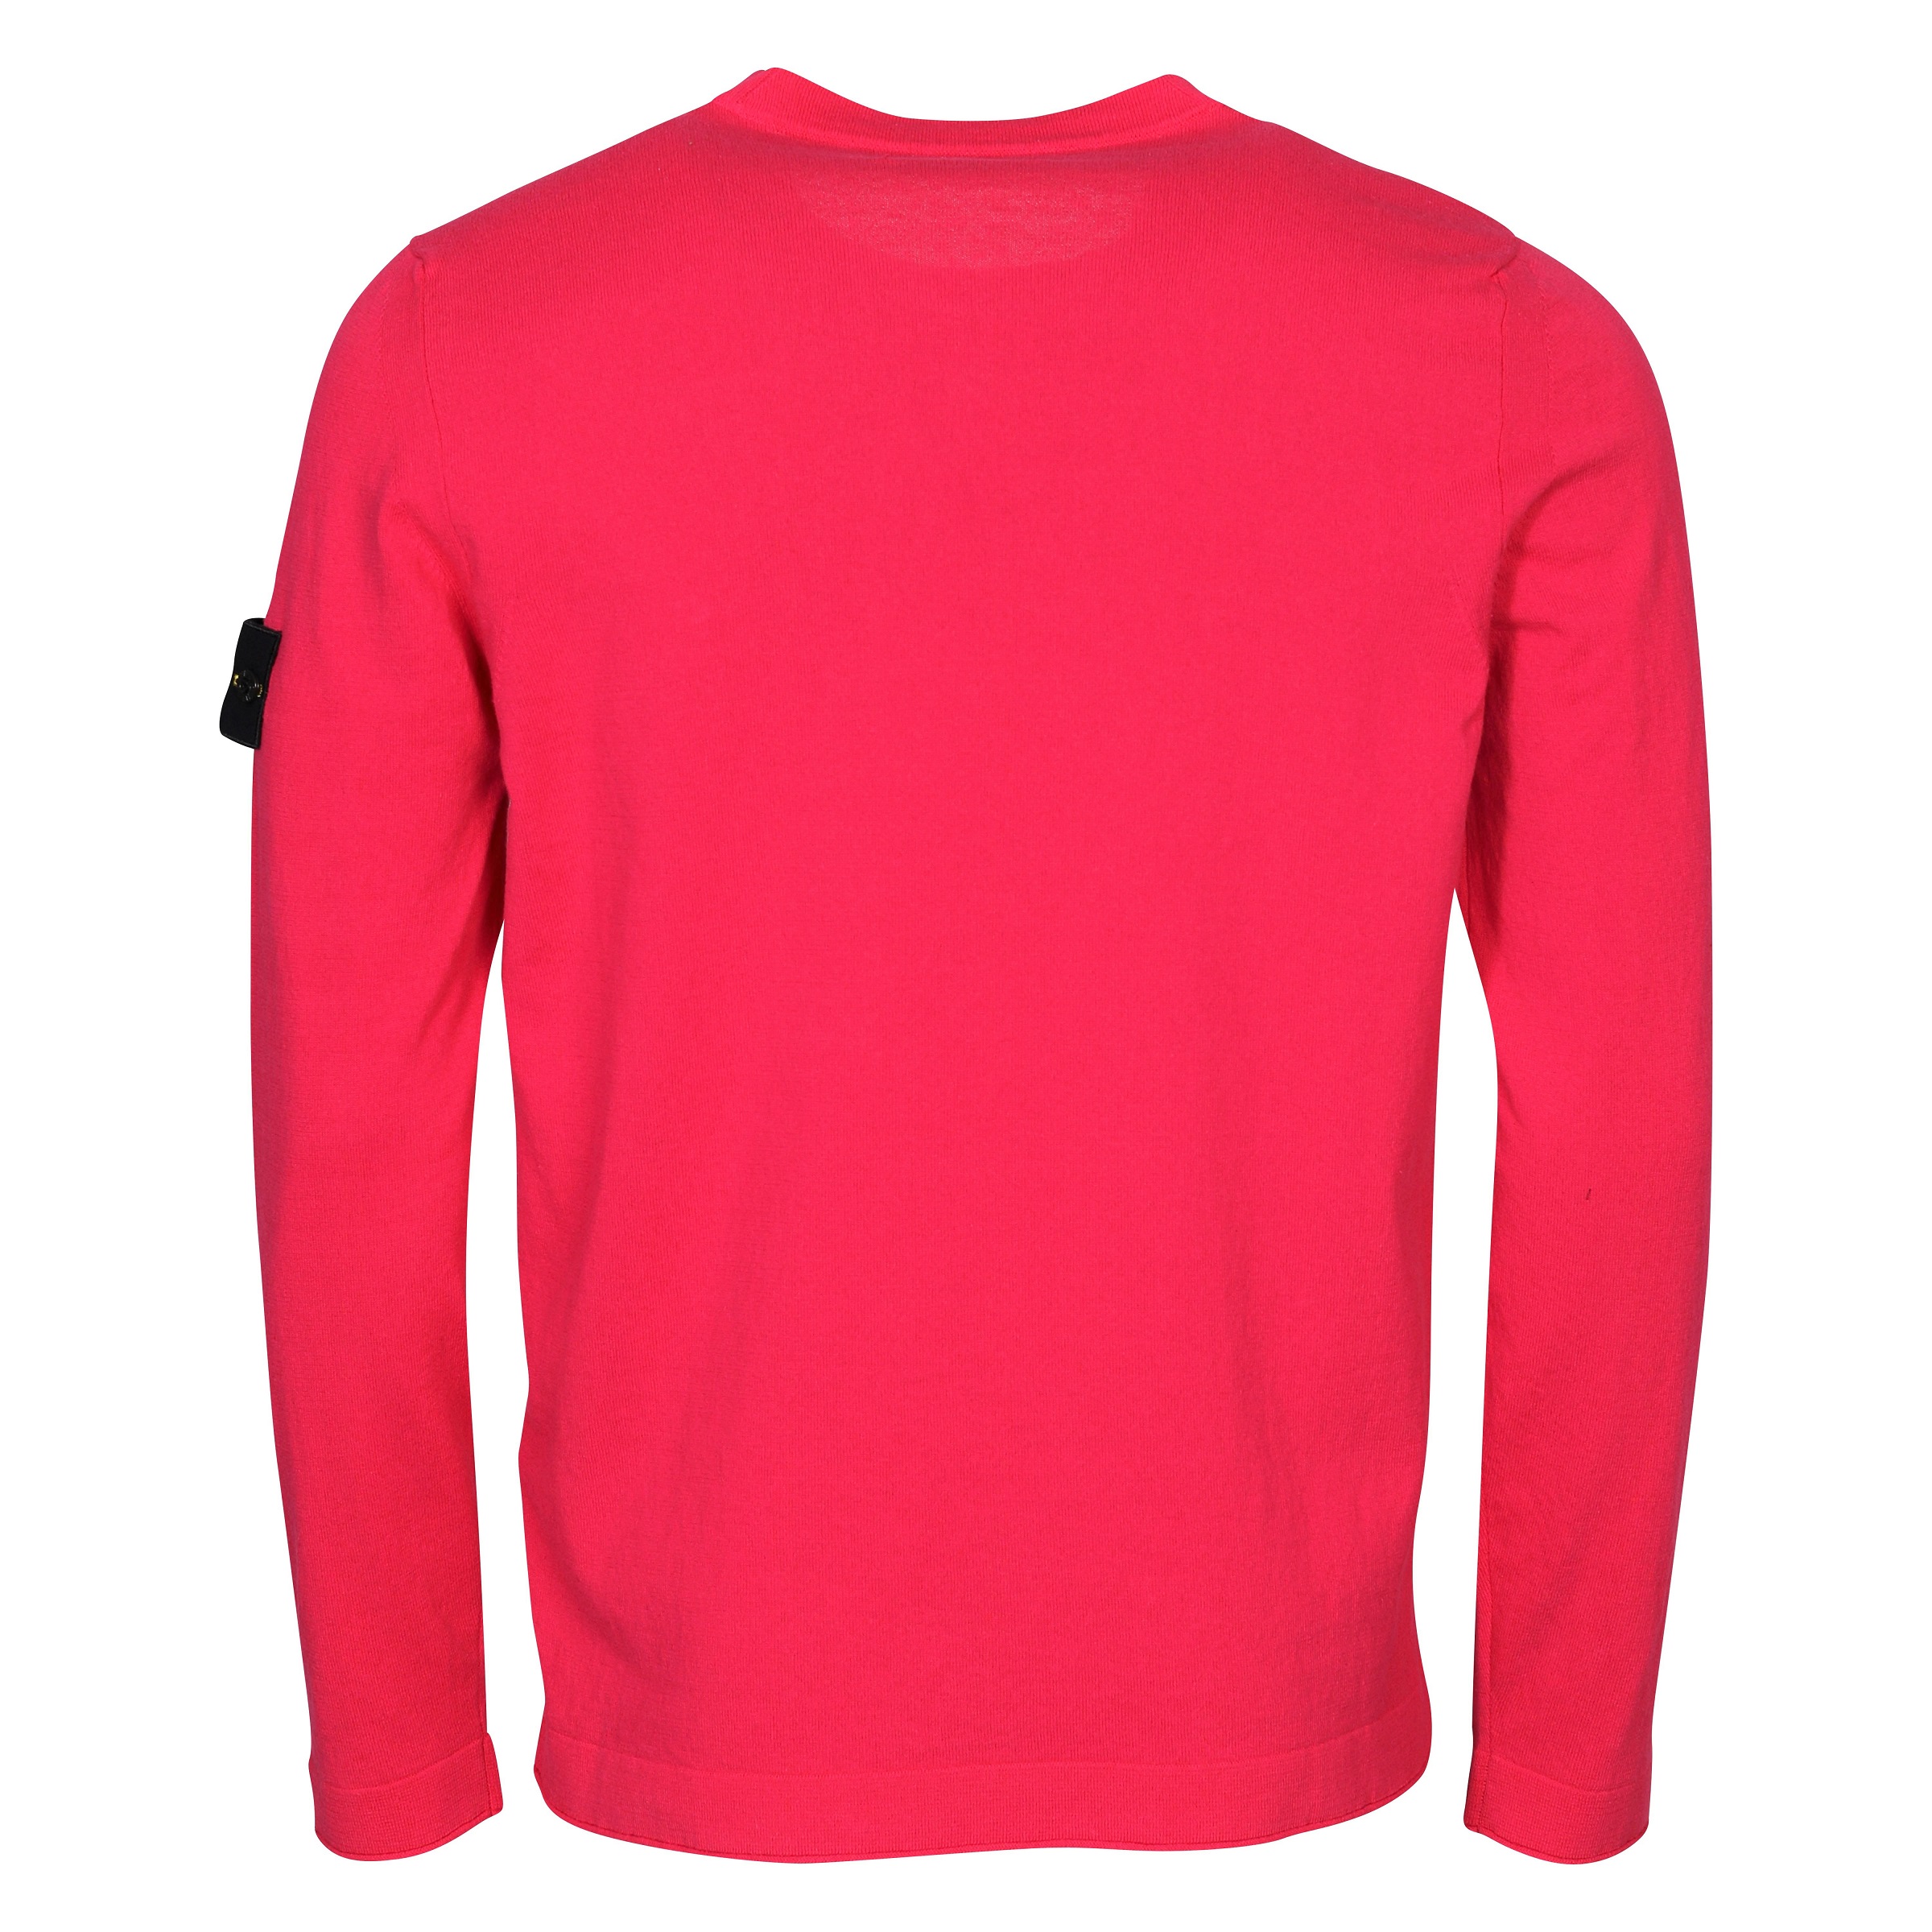 Stone Island Chest Pocket Knit Sweater in Pink S